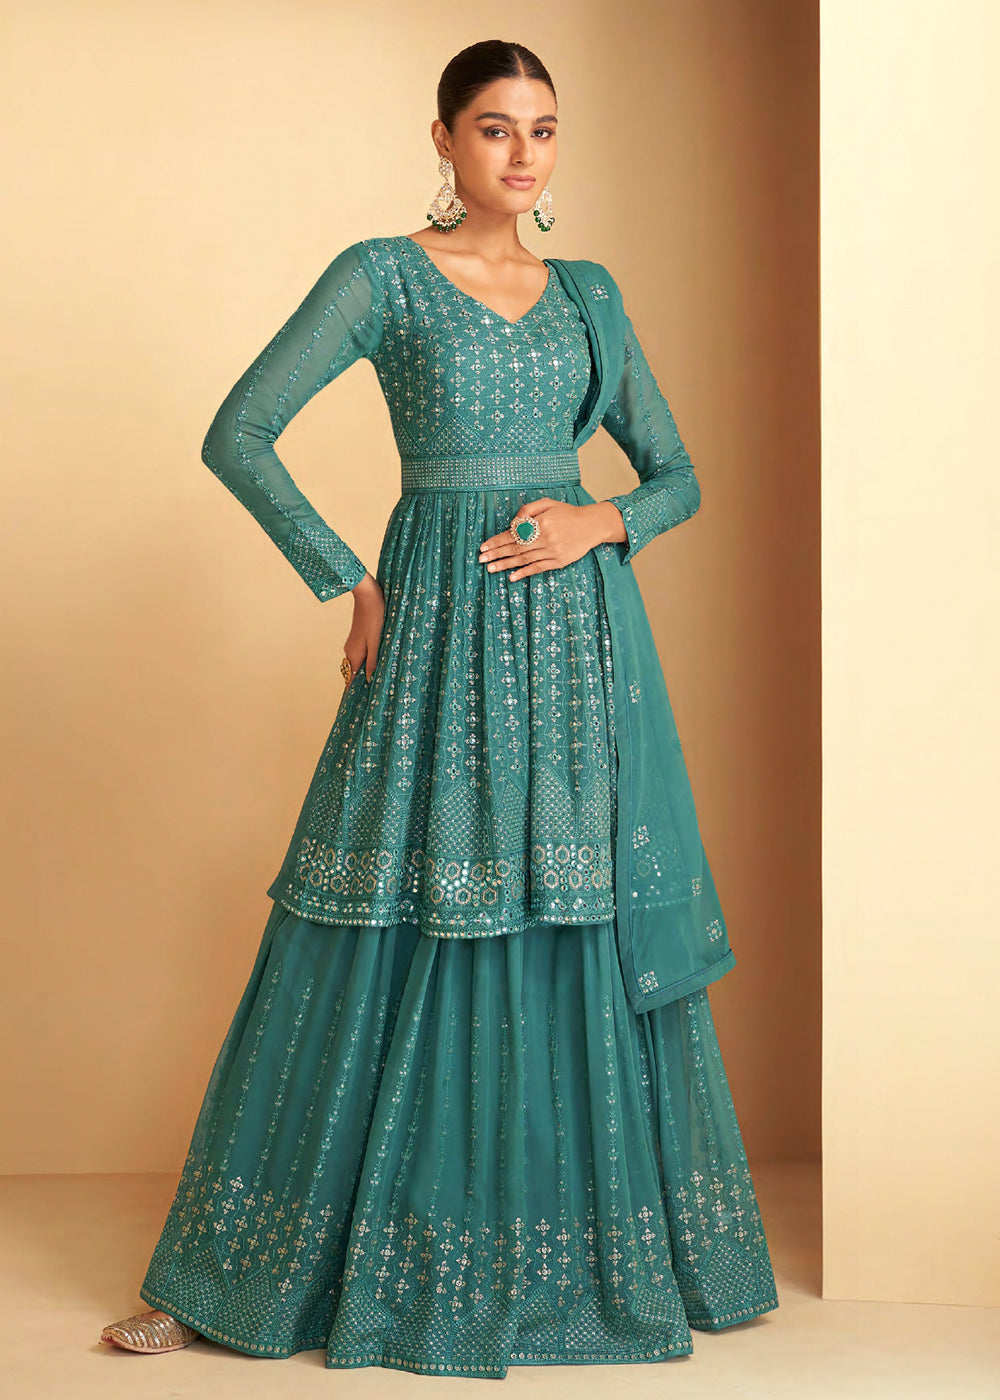 Shop Now Pretty Sea Green Sequins Embroidered Sharara Style Suit Online at Empress Clothing in USA, UK, Canada, Germany & Worldwide. 